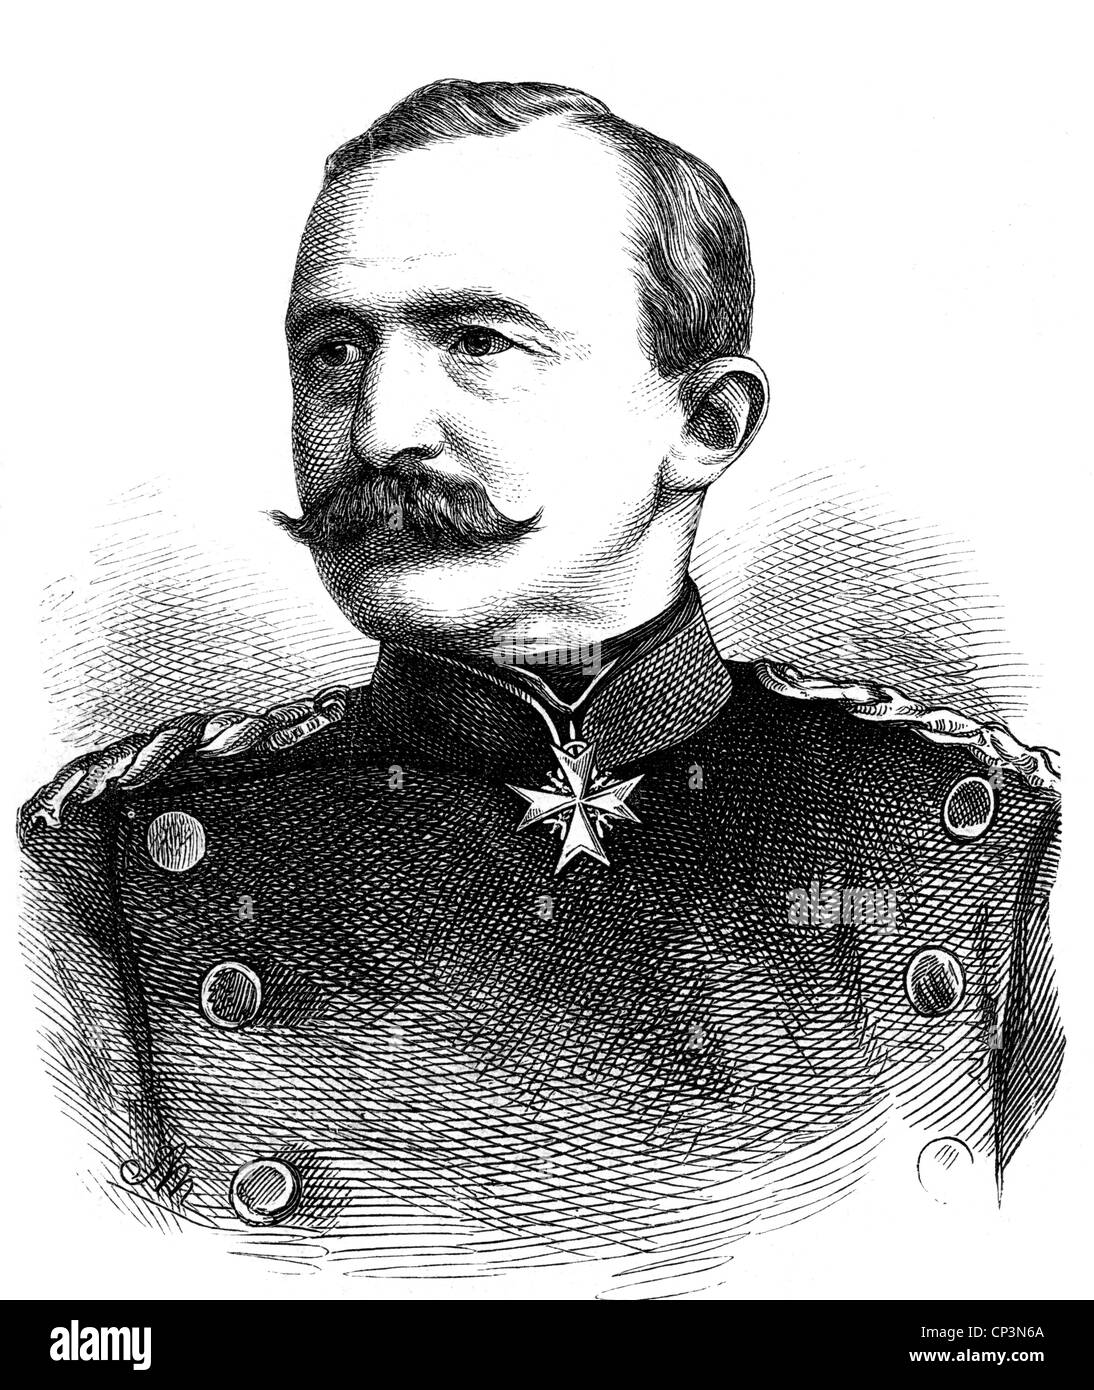 Obernitz, Hugo von, 16.4.1819 - 18.9.1901, Prussian general, commander of the troops of Wuerttemberg, wood engraving, circa 1870, Stock Photo